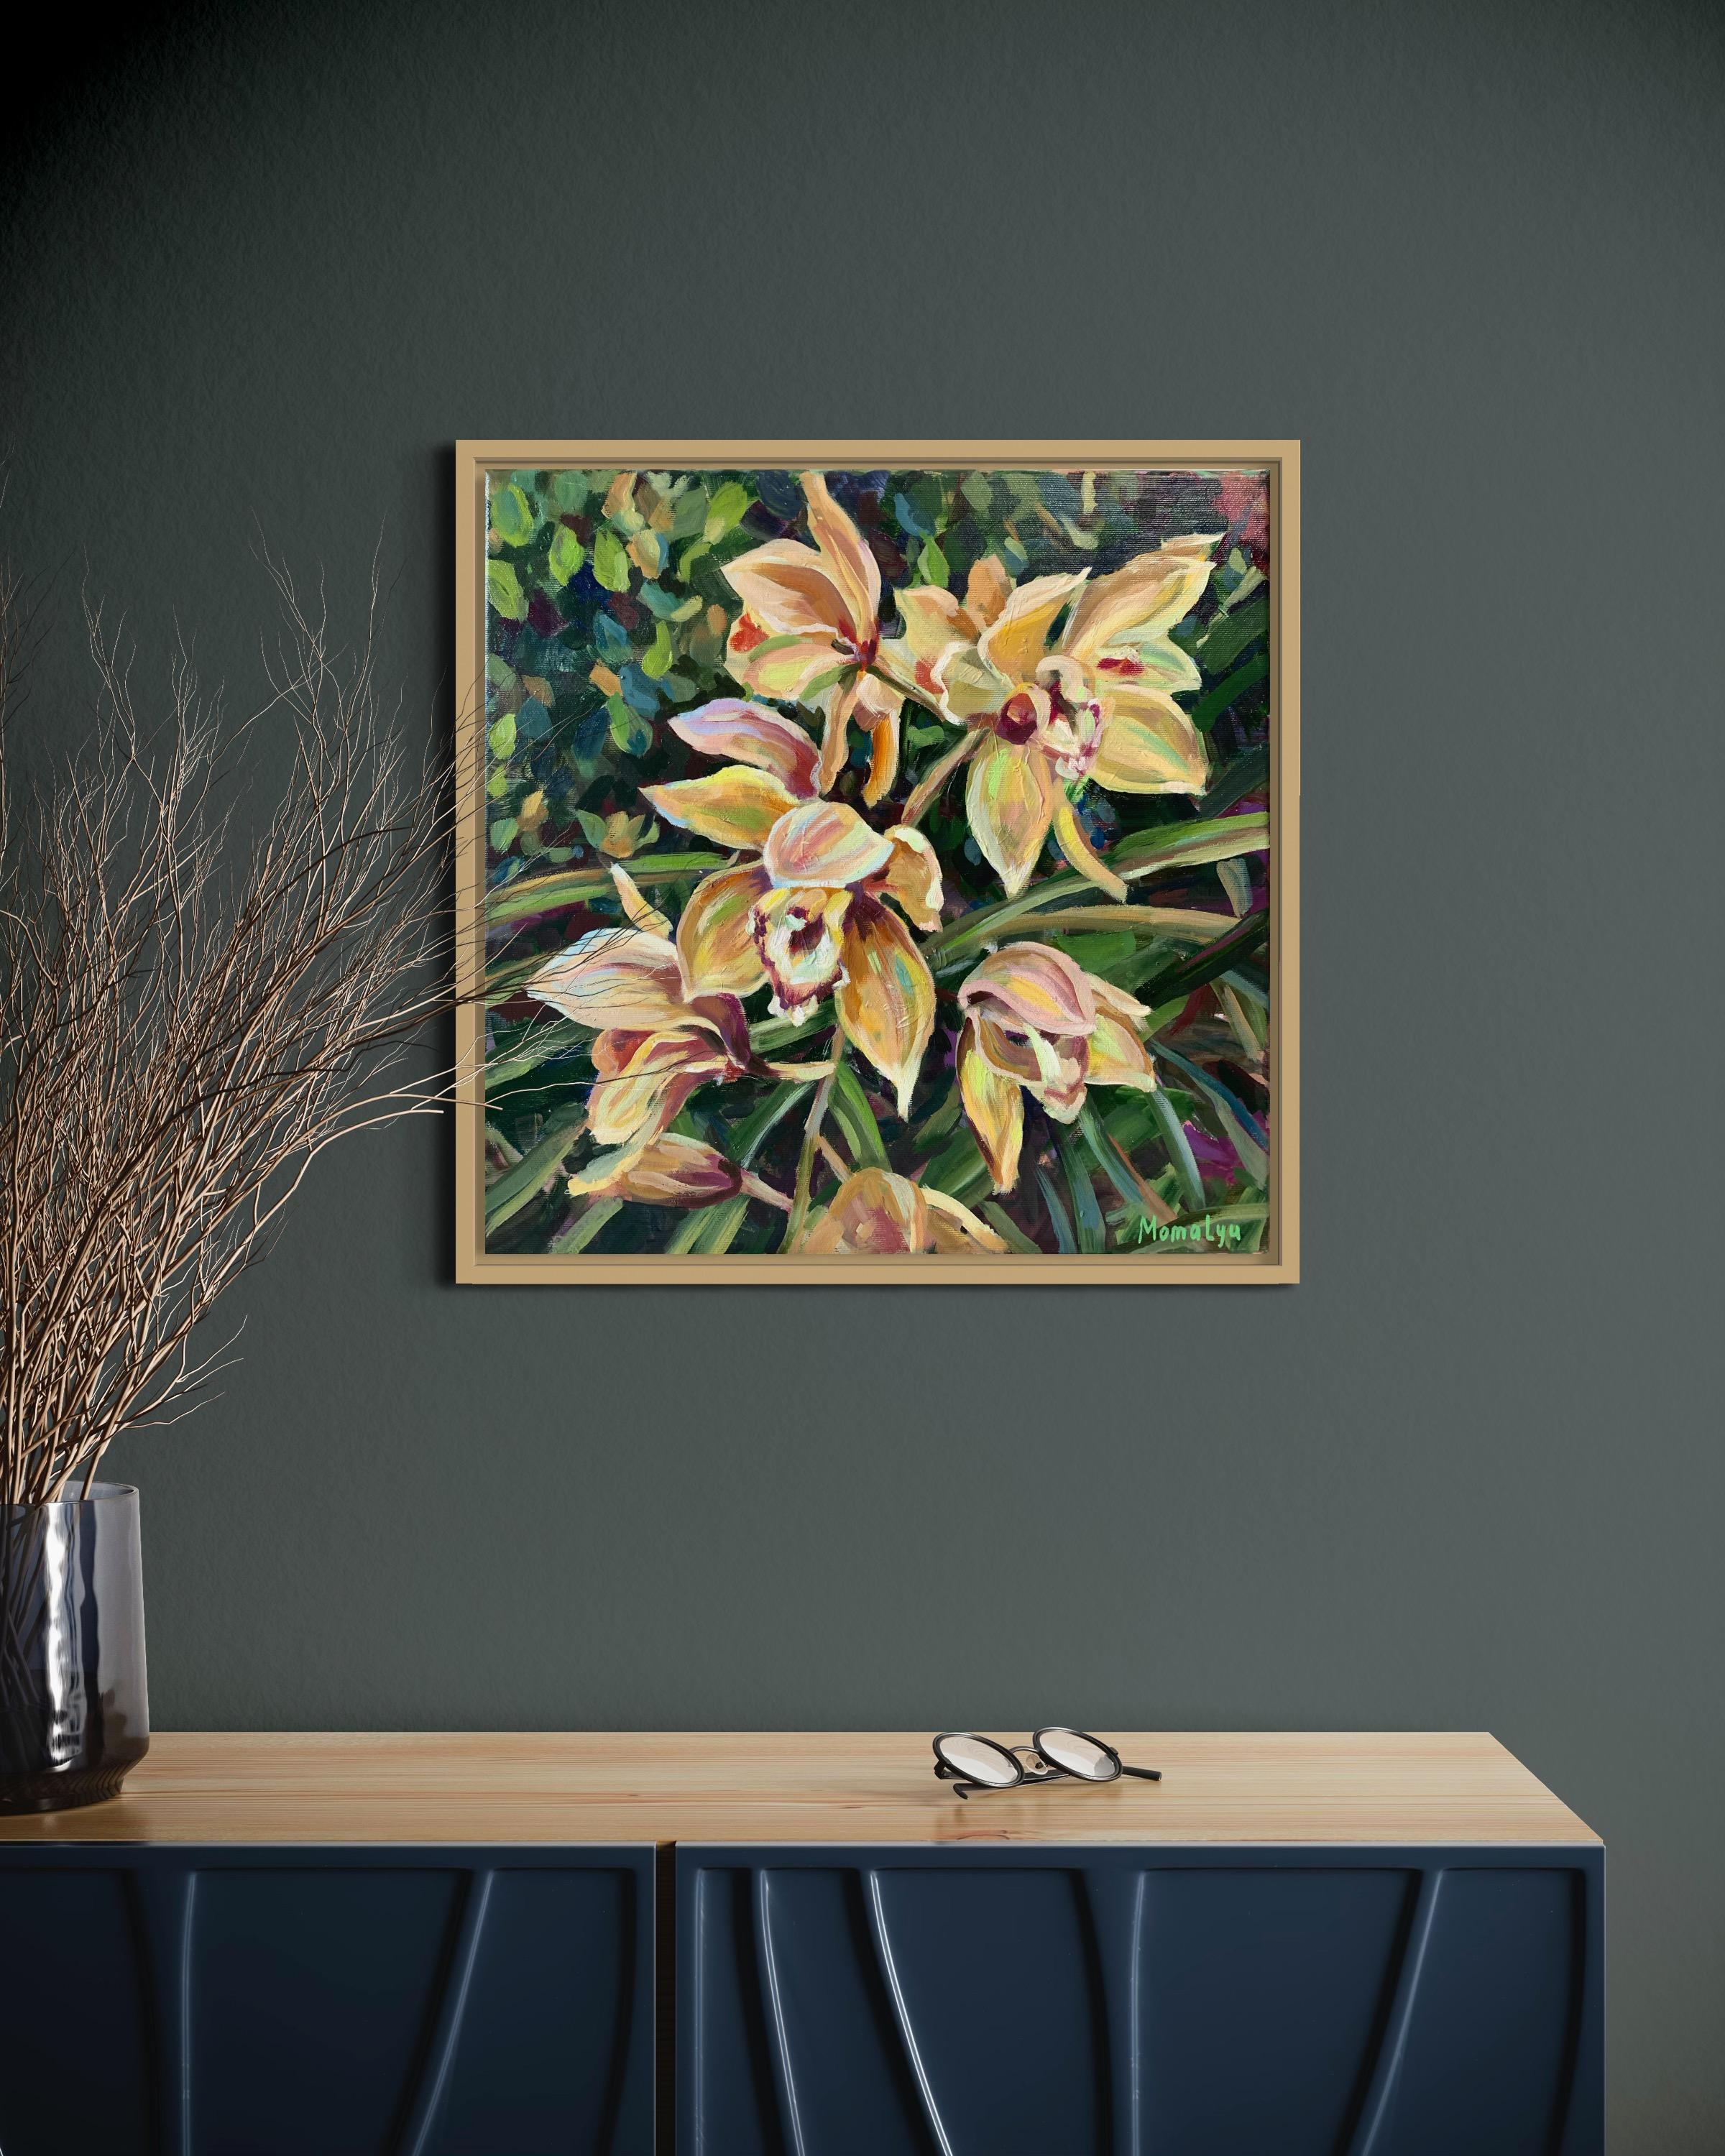 Original oil painting with positive mood. Delicate beige exotic flowers Orchids in tropical garden.
How often are we in the moment? Noticing the beauty nearby and admiring the creation of nature.
Flowers full of dignity delight us with their